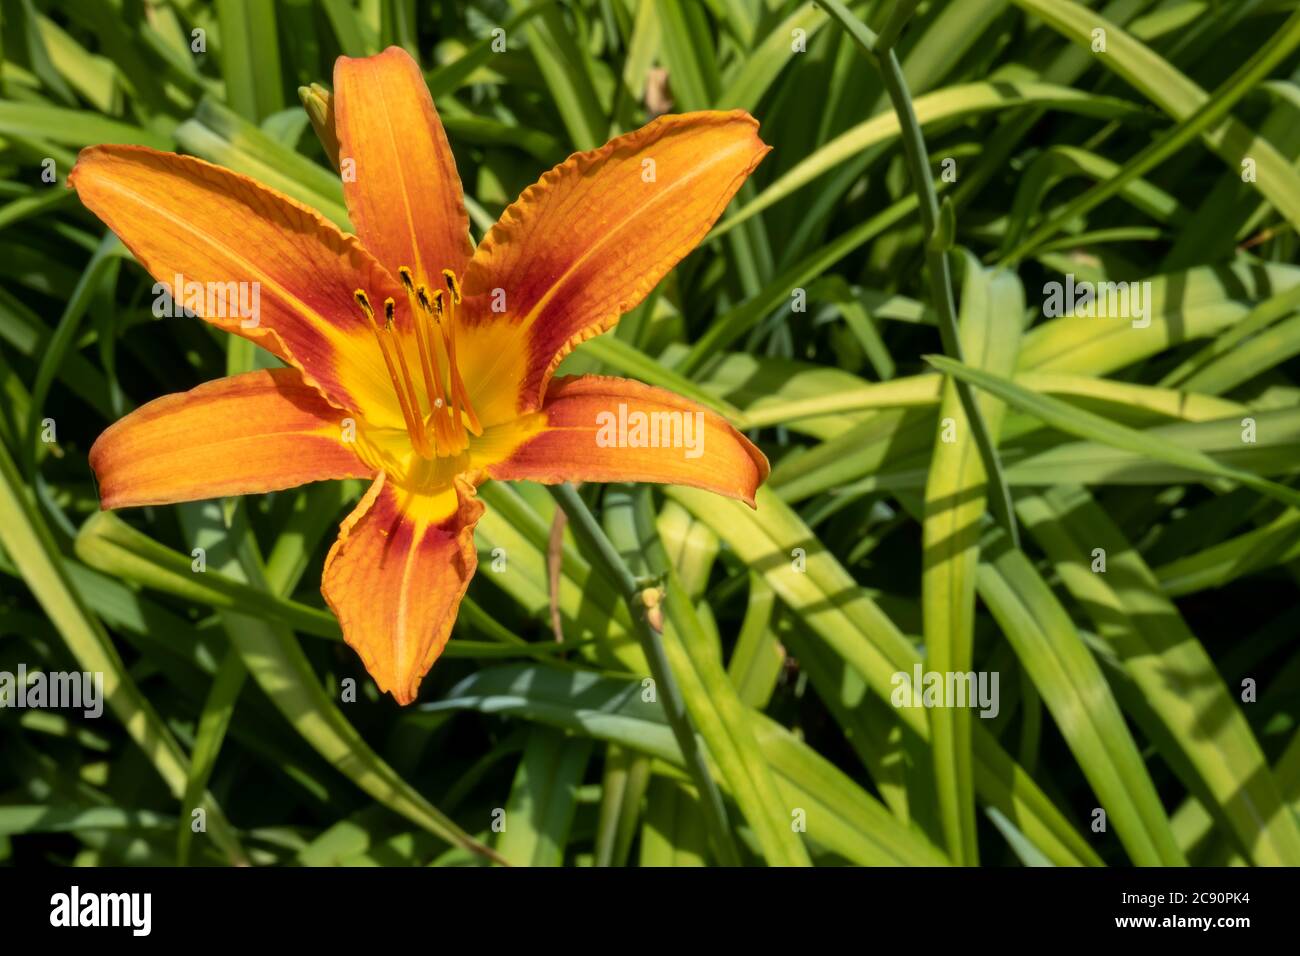 A close-up view of the flower of an orange day-lily, or tawny day-lily (Hemerocallis fulva) in full bloom in a garden, with green leaves forming a bac Stock Photo